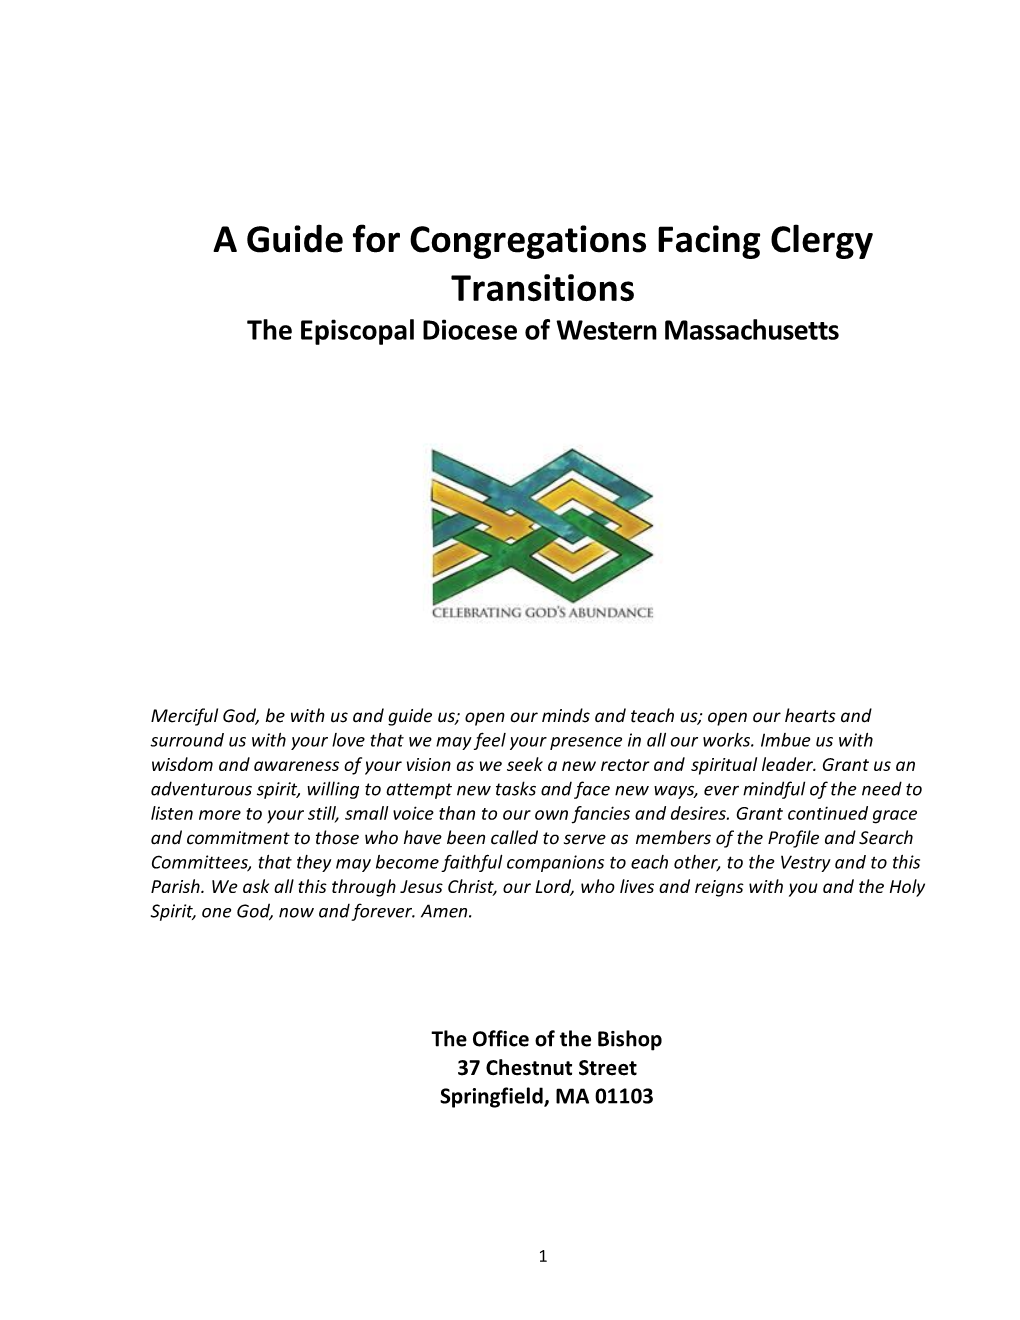 A Guide for Congregations Facing Clergy Transitions the Episcopal Diocese of Western Massachusetts